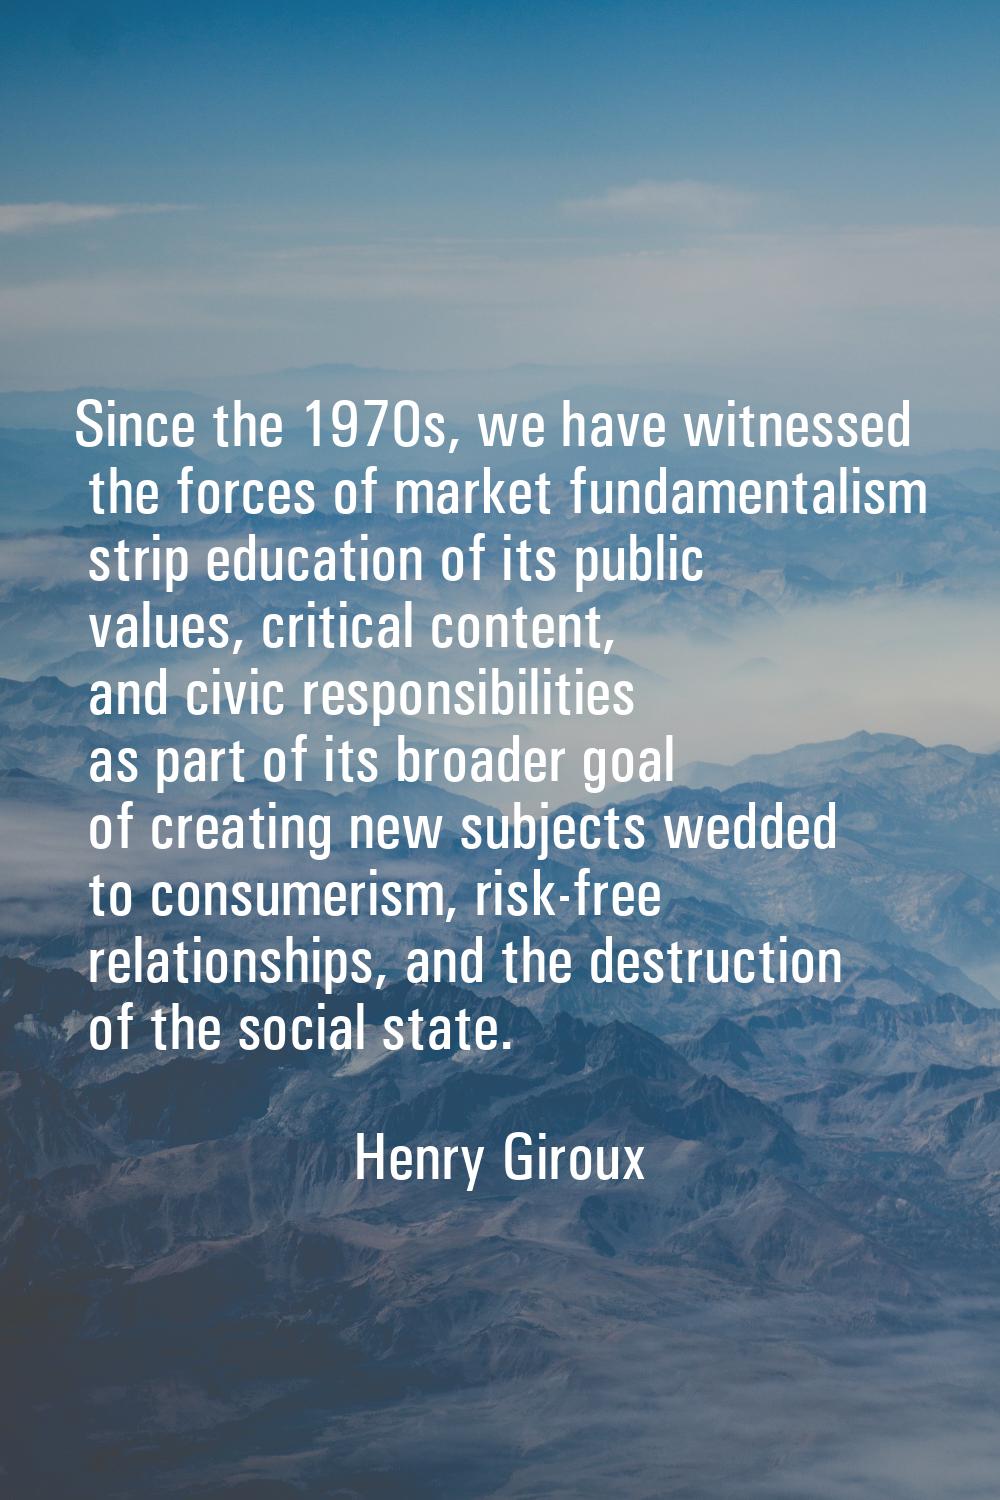 Since the 1970s, we have witnessed the forces of market fundamentalism strip education of its publi